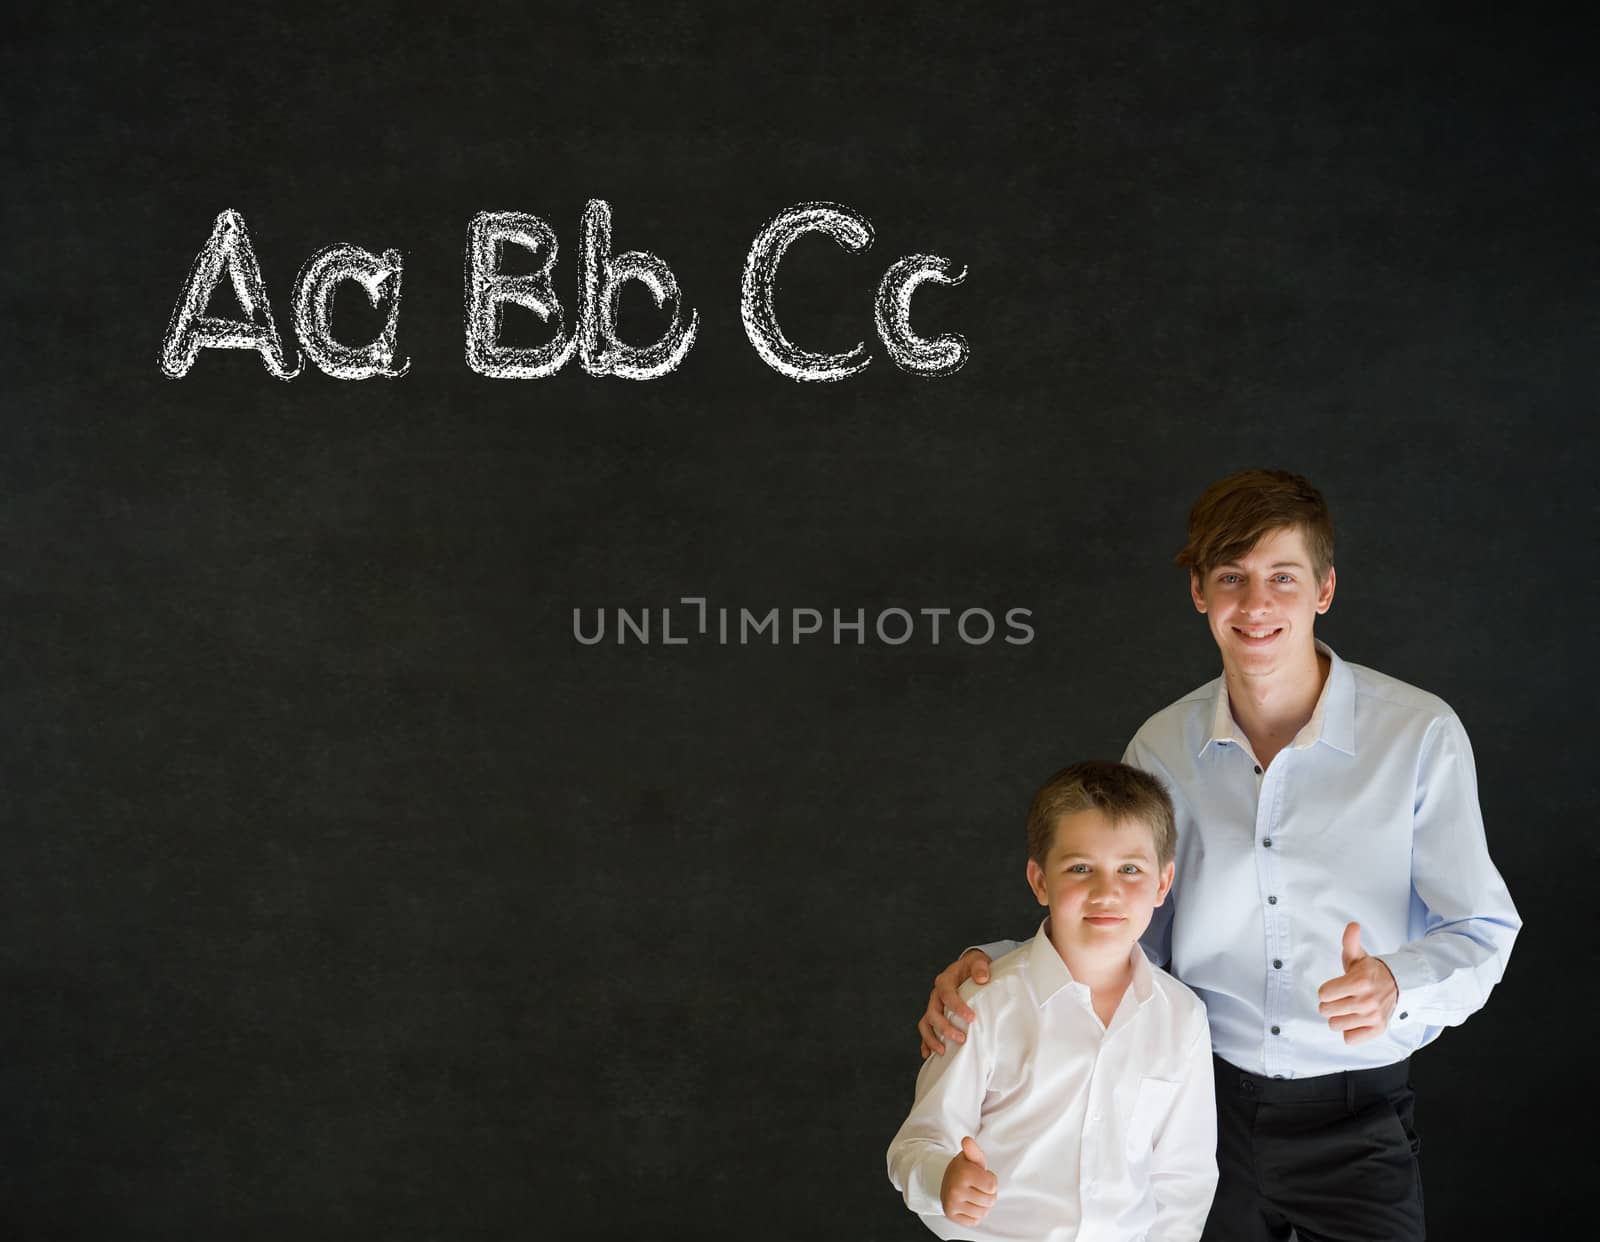 Thumbs up boy dressed up as business man with teacher man and learn English language alphabet on blackboard background